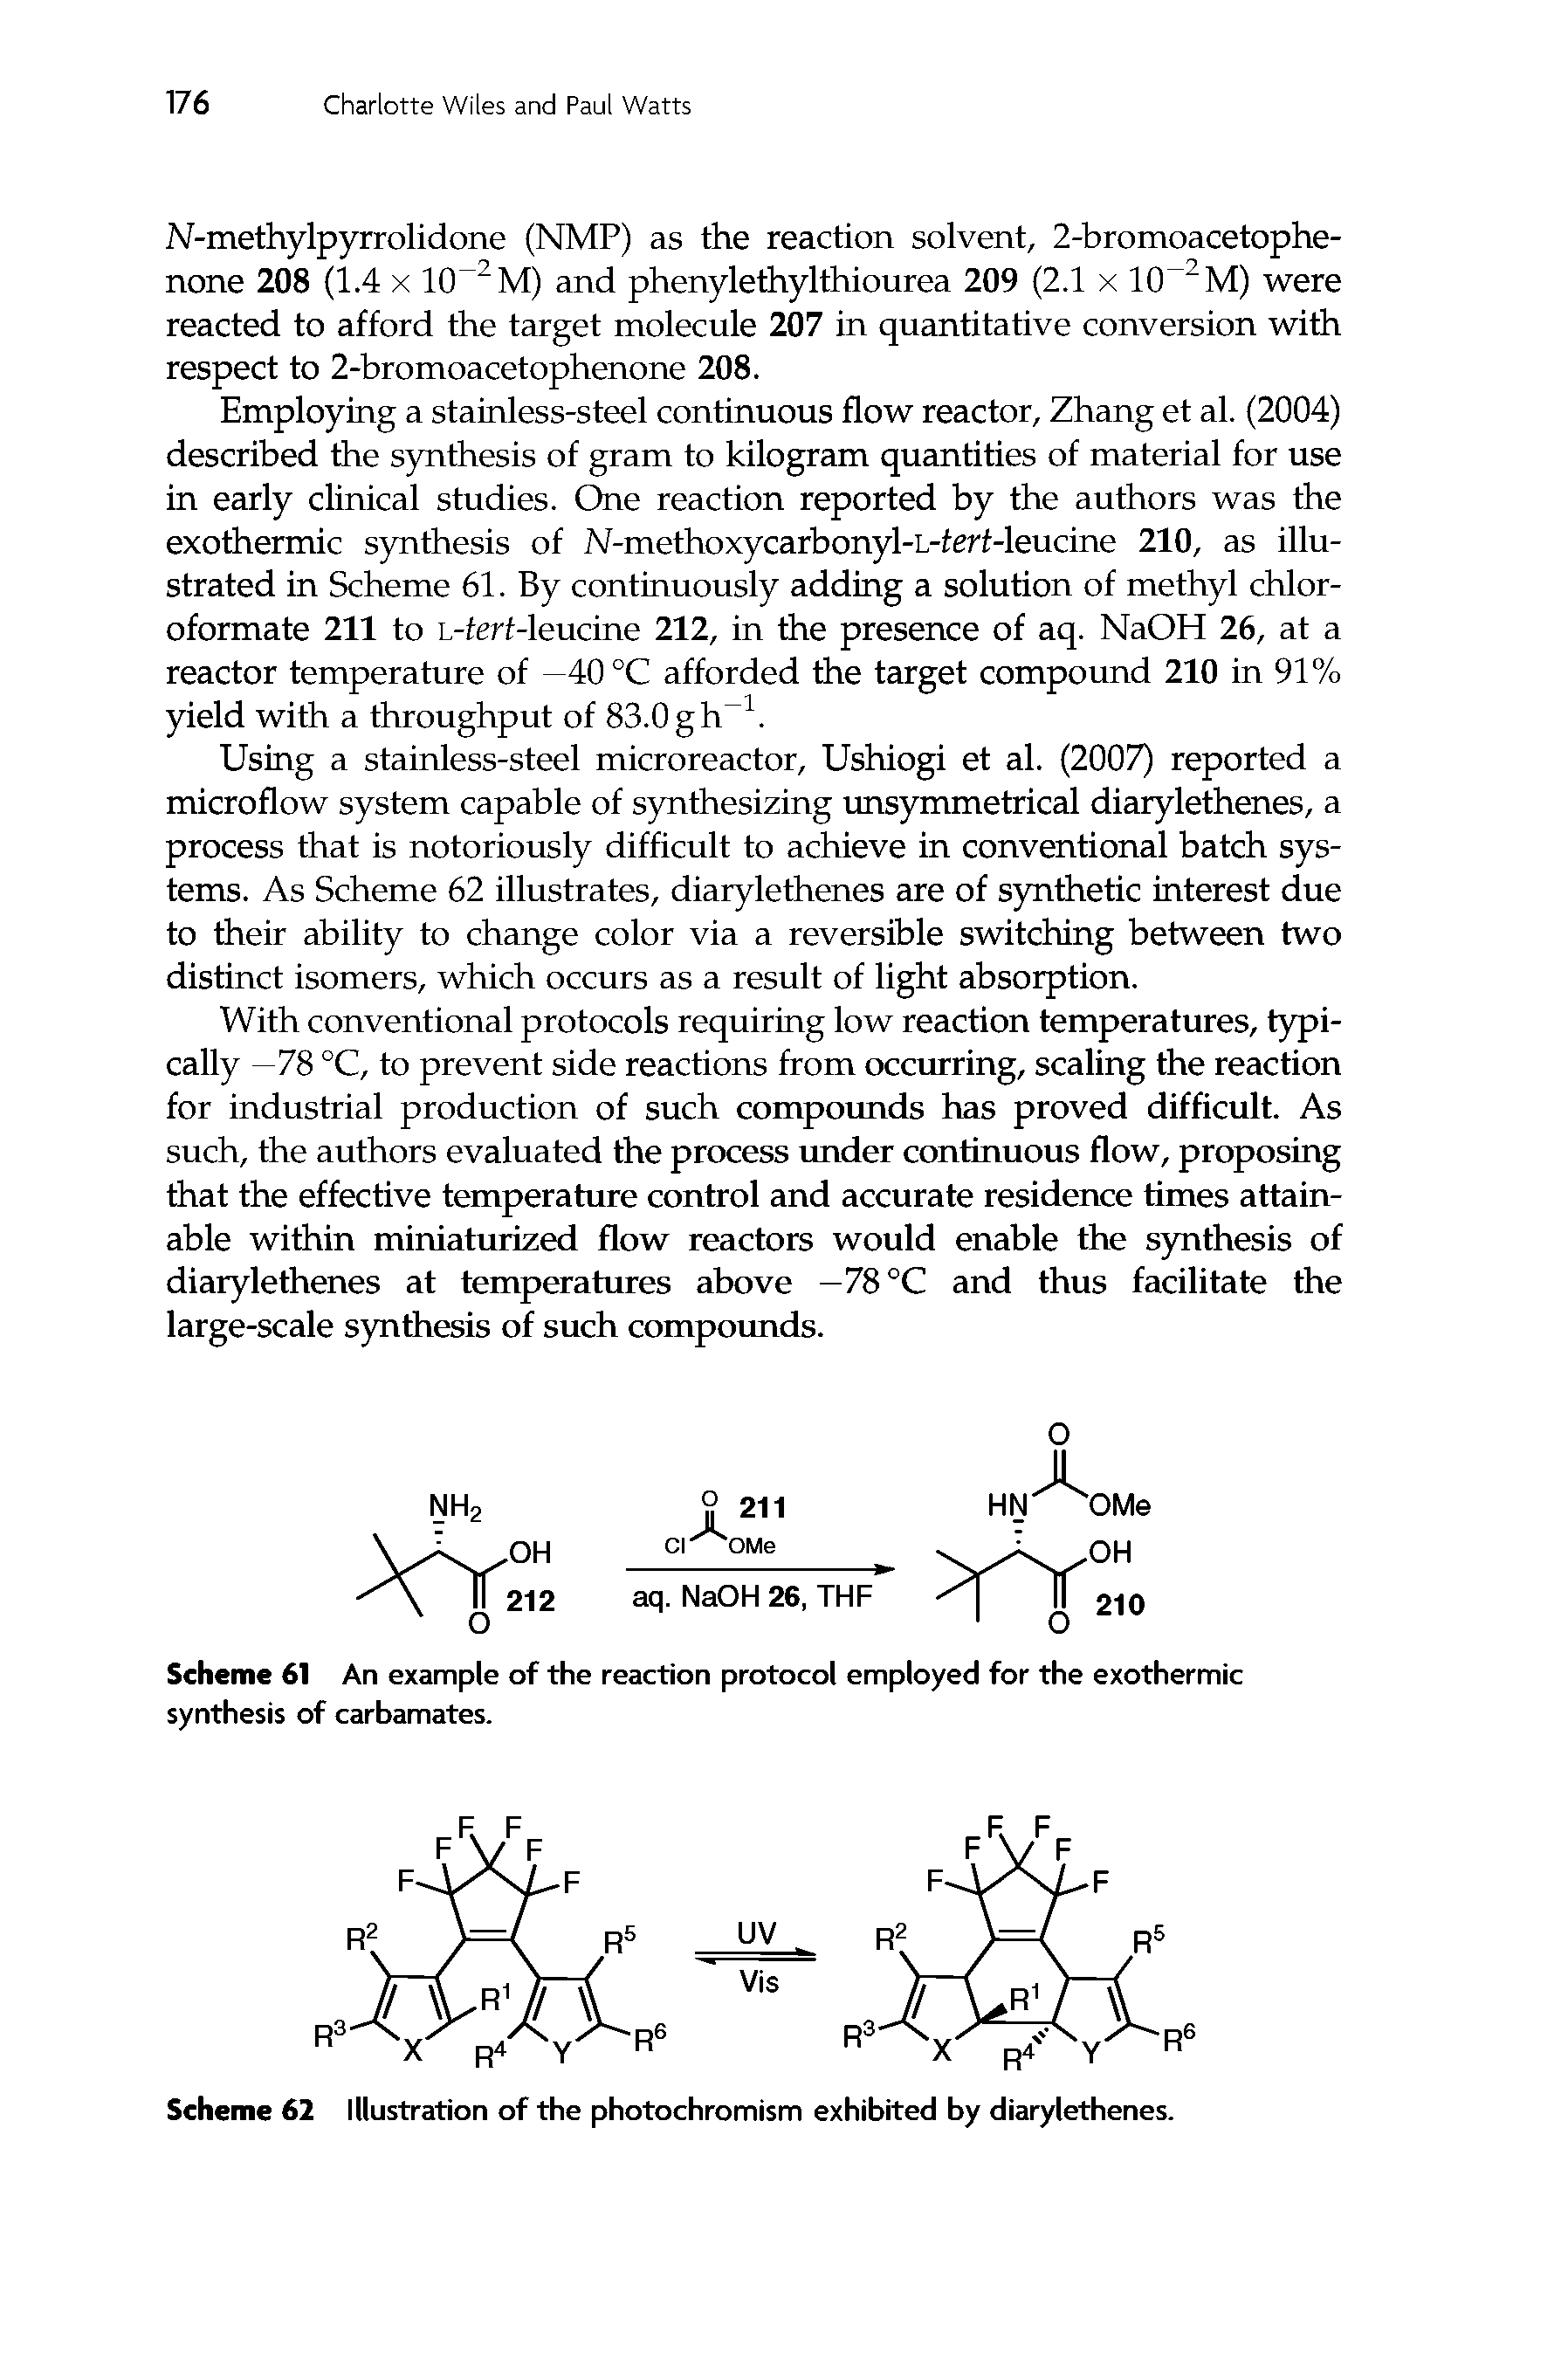 Scheme 61 An example of the reaction protocol employed for the exothermic synthesis of carbamates.